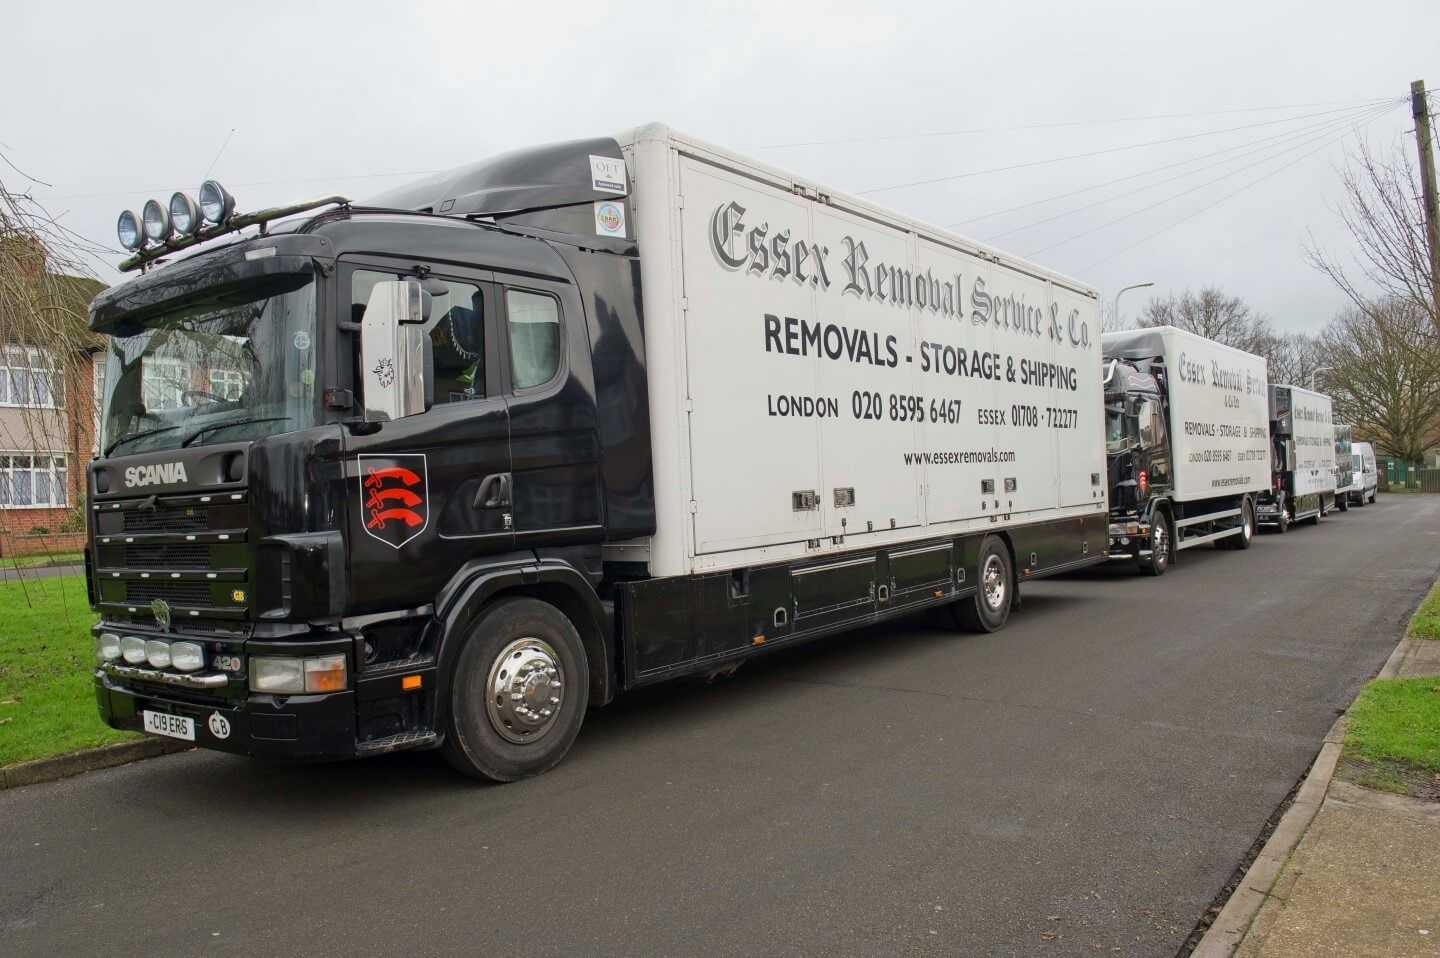 Essex Removal Services parked in residential street